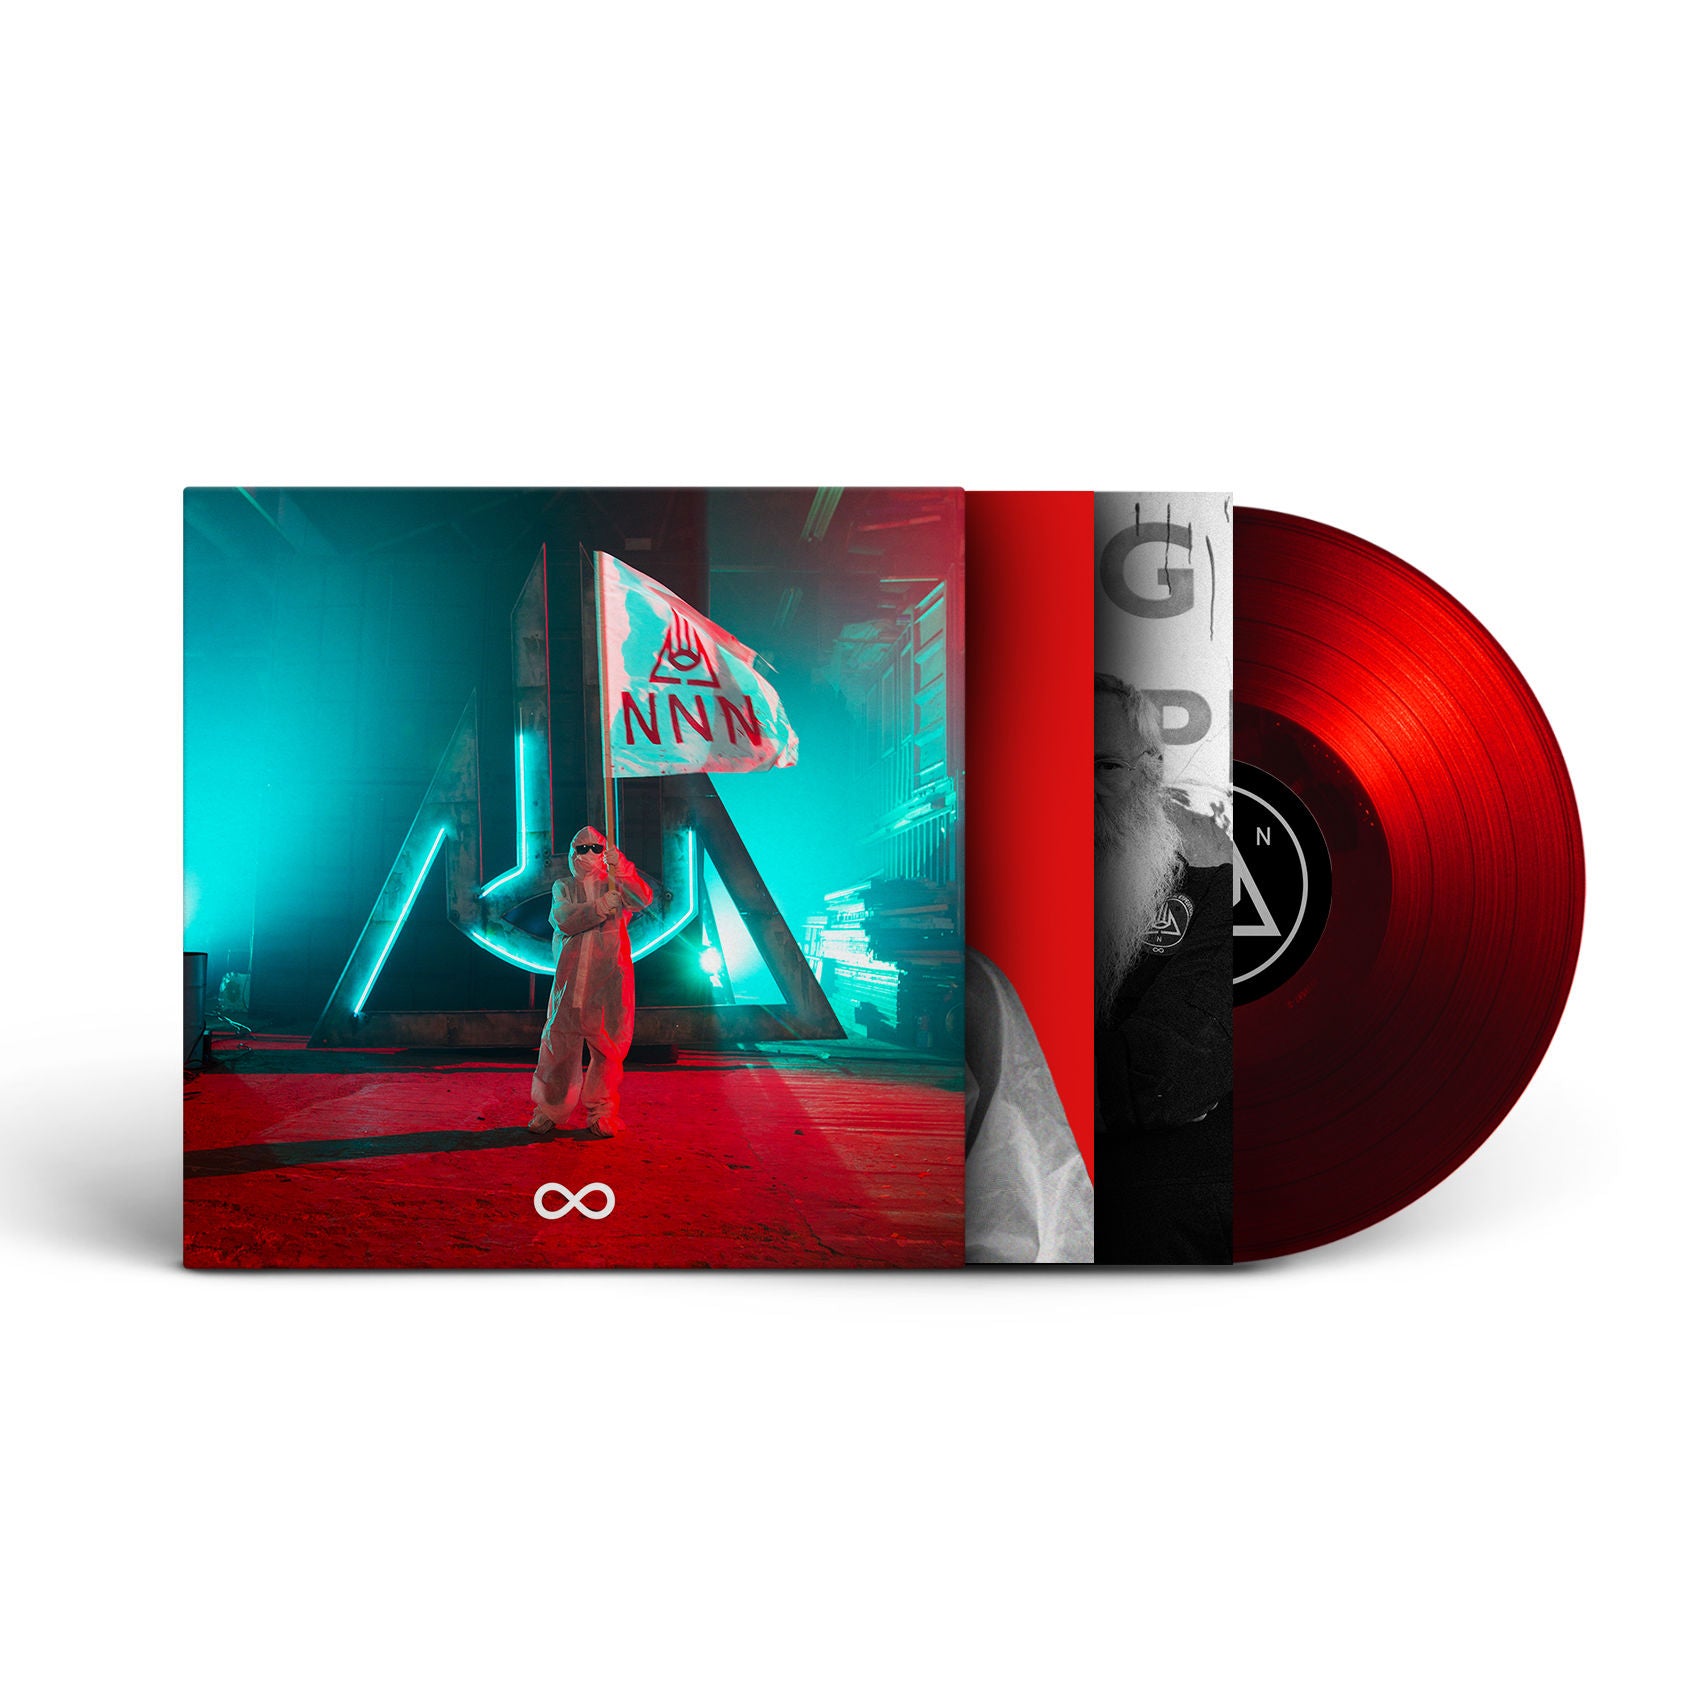 Never Not Nothing: Limited Edition Translucent Red Vinyl LP